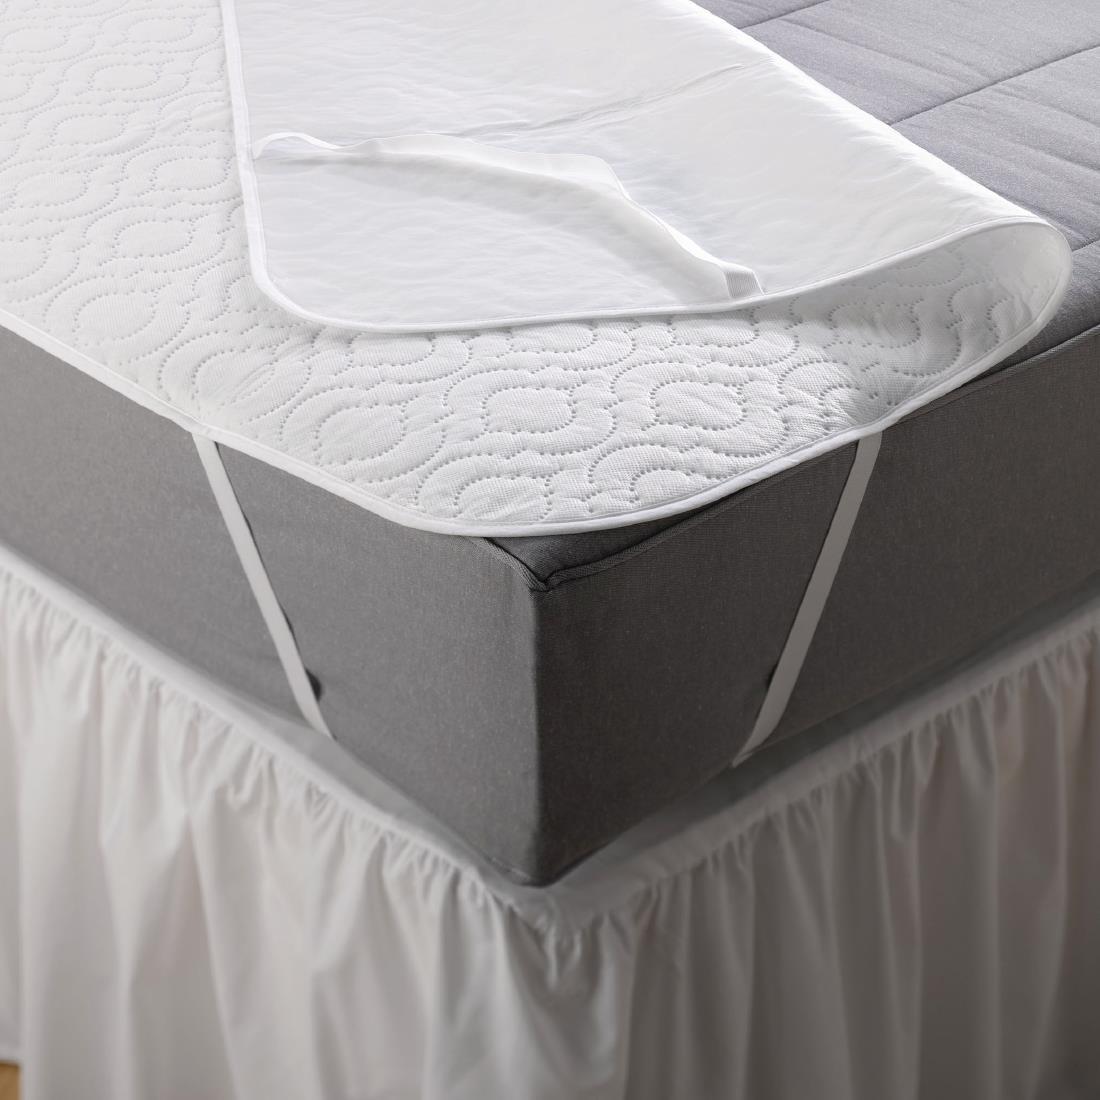 Mitre Essentials PVC Quilted Mattress Protector Double - GU552  - 2